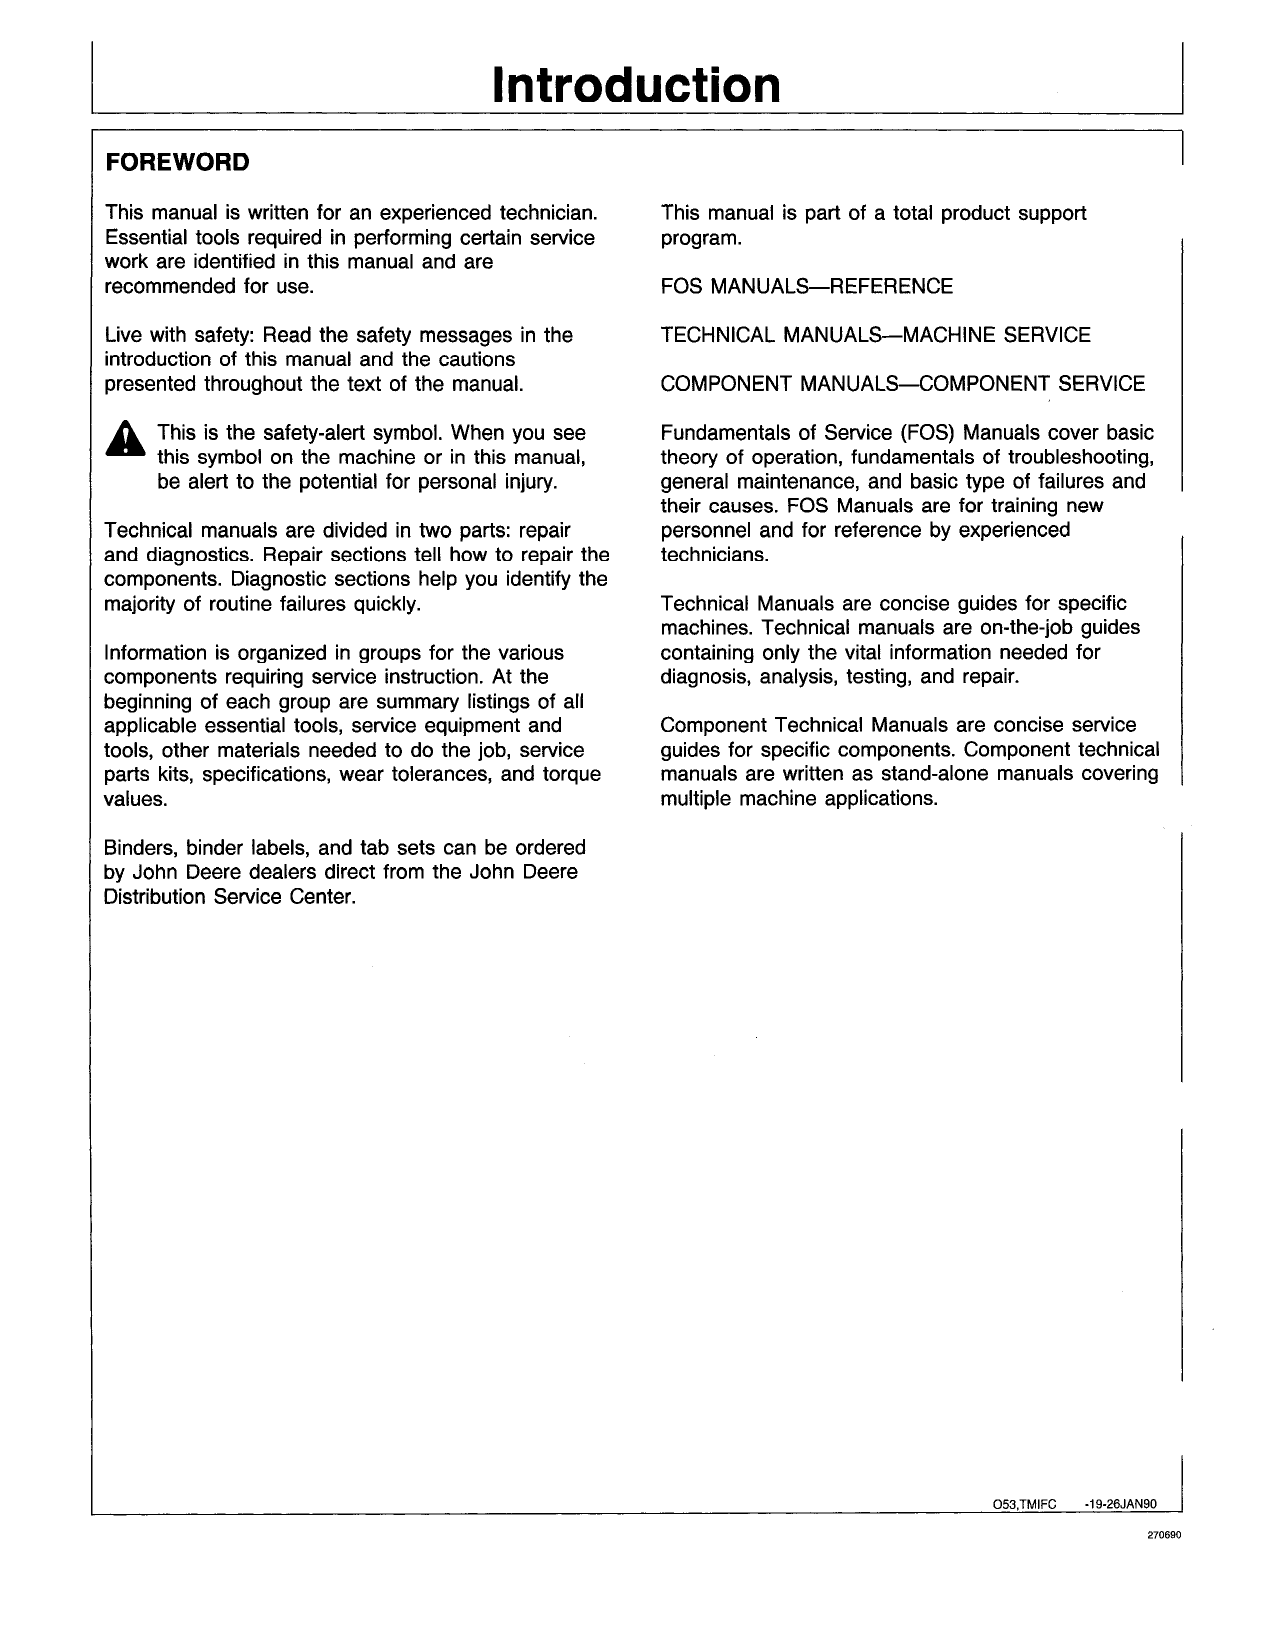 John Deere 490 Hydraulic Excavator technical manual Preview image 2